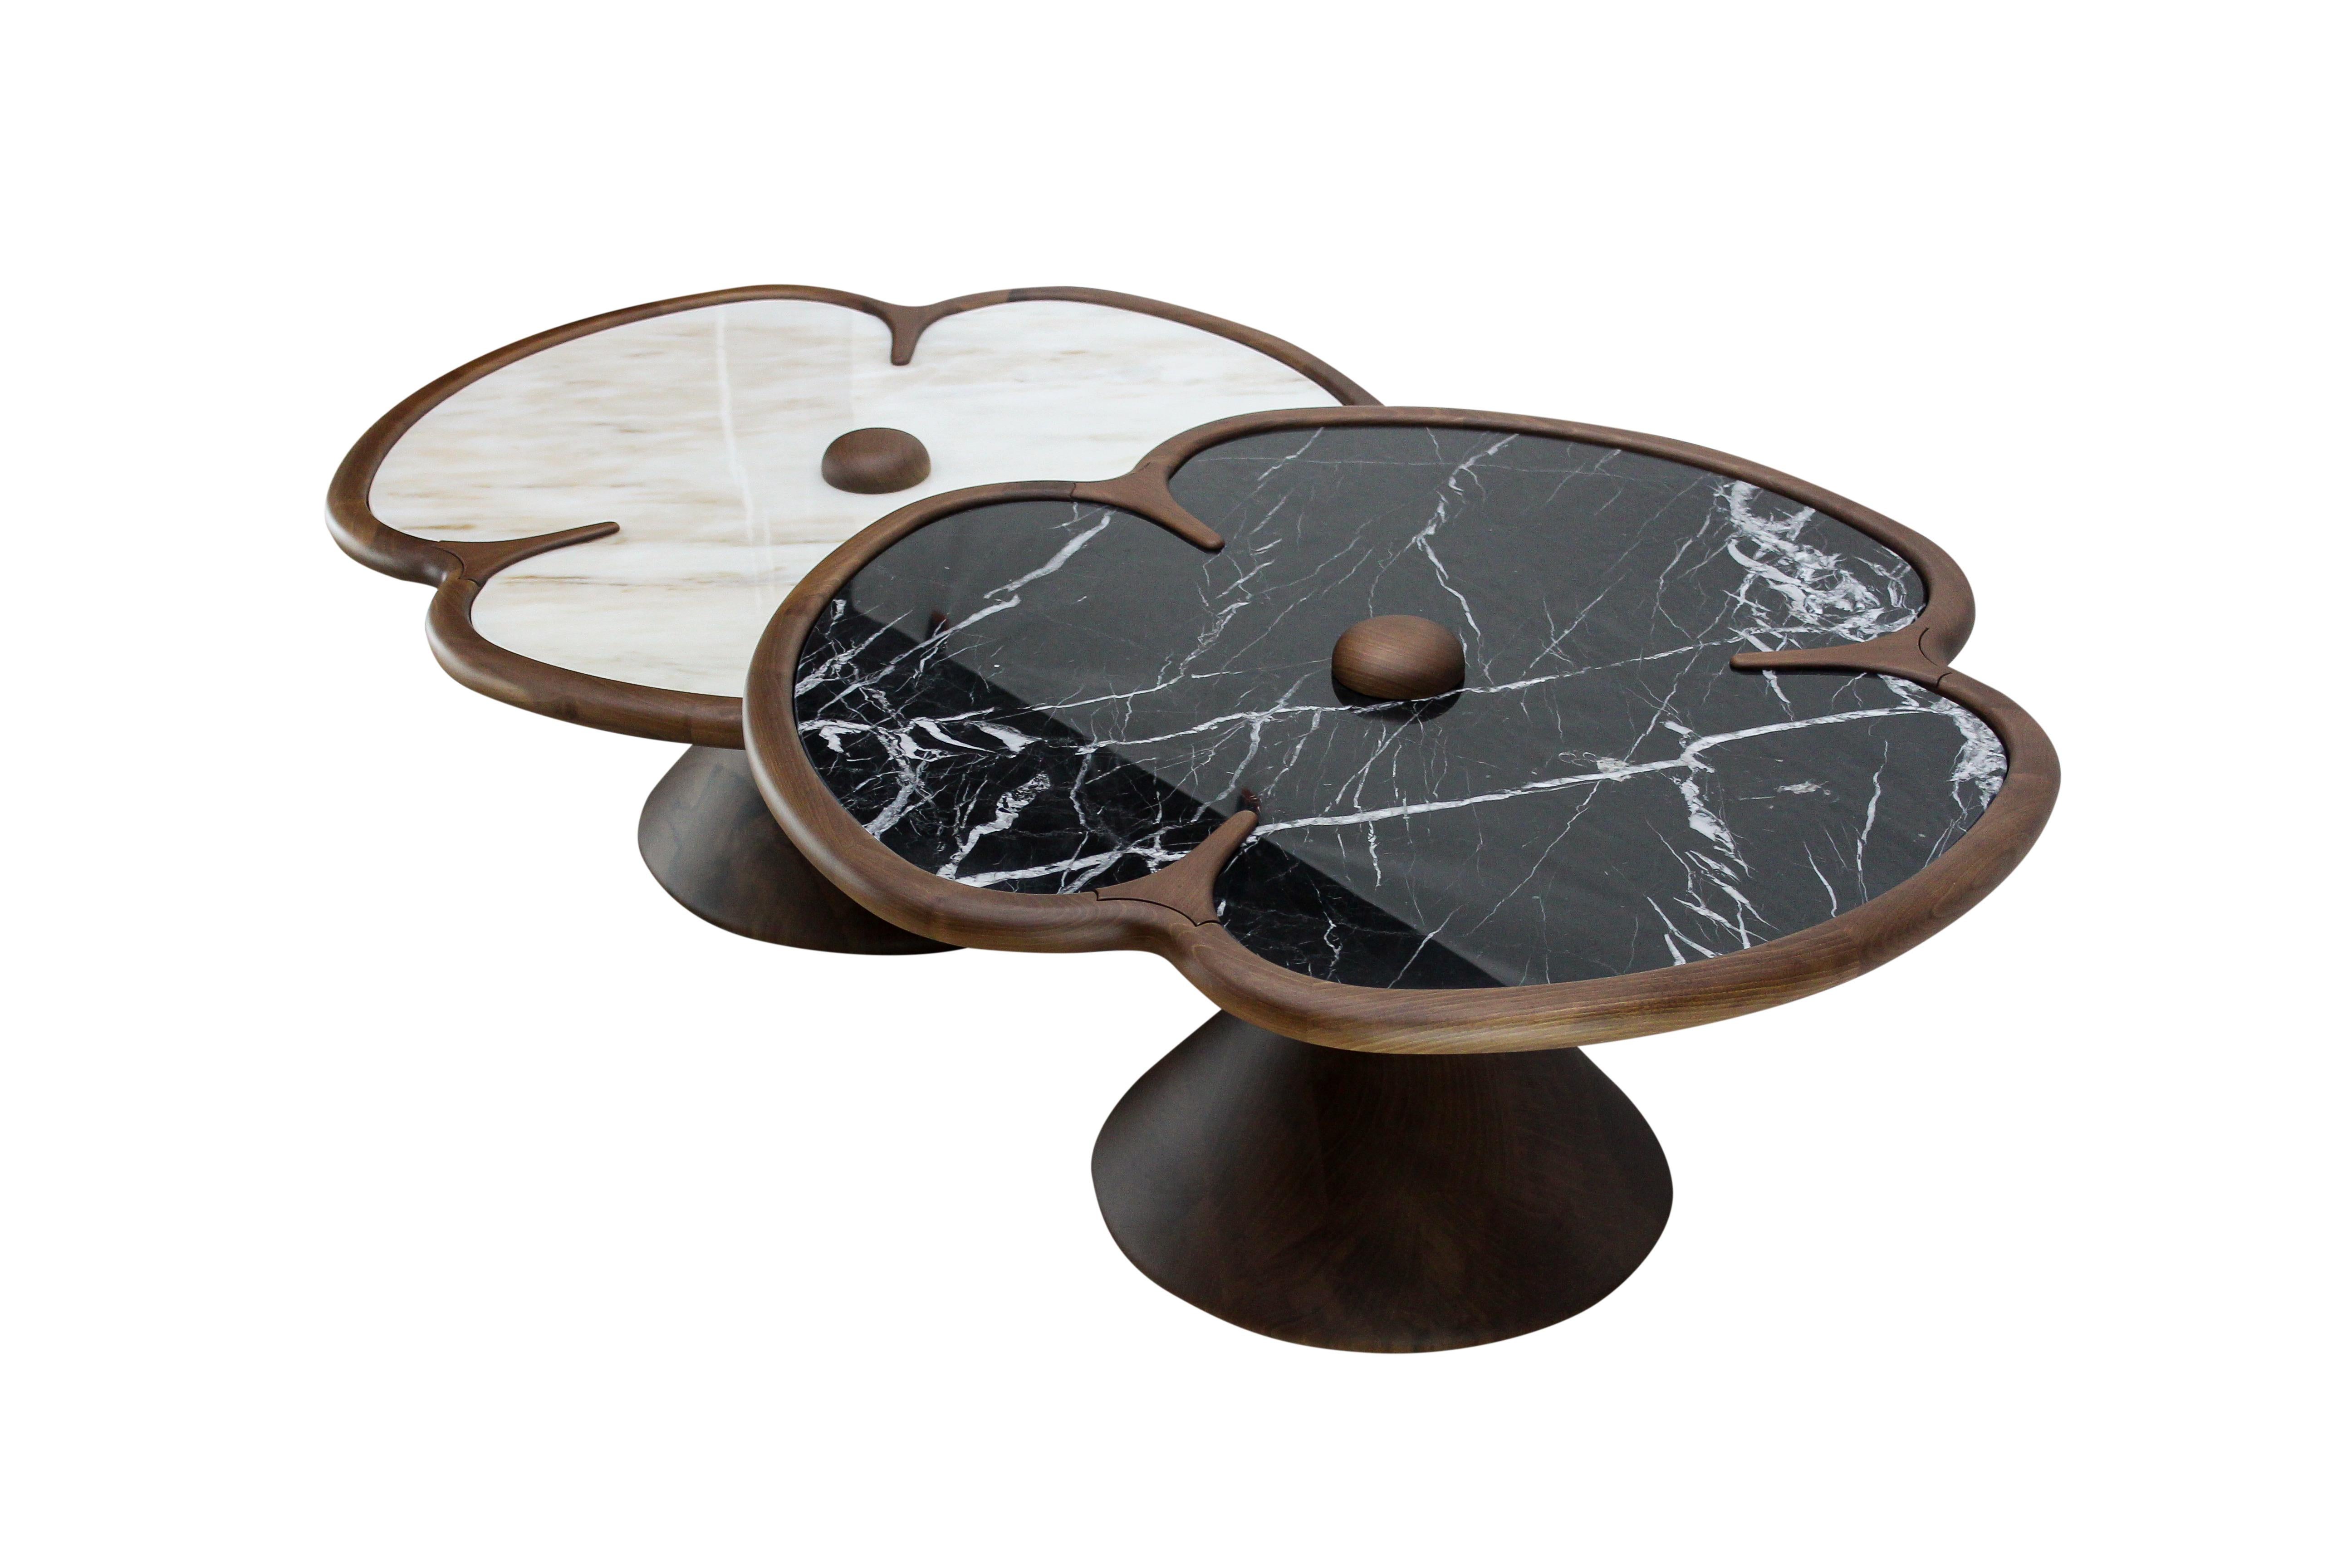 A true statement of luxury
Combining the finest and ancient craftsmanship with luxurious levels of design, quality, and comfort. 

Tallaght Coffee Table, Modern Collection, Solid Walnut Wood, Portuguese Estremoz White Marble polished, Nero Marquina